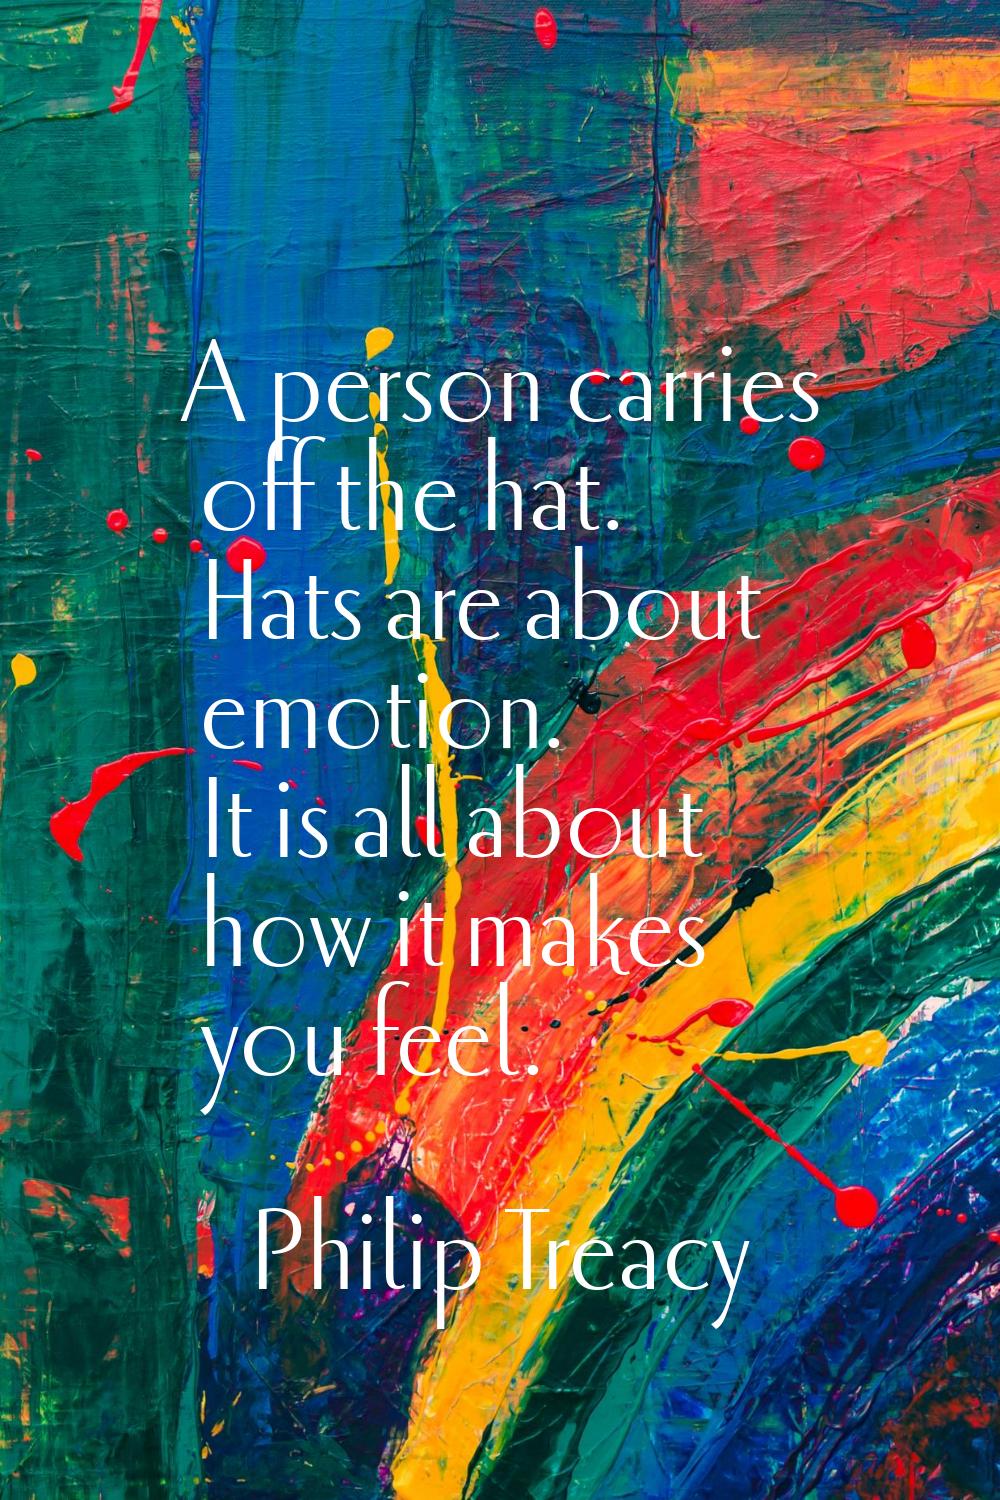 A person carries off the hat. Hats are about emotion. It is all about how it makes you feel.